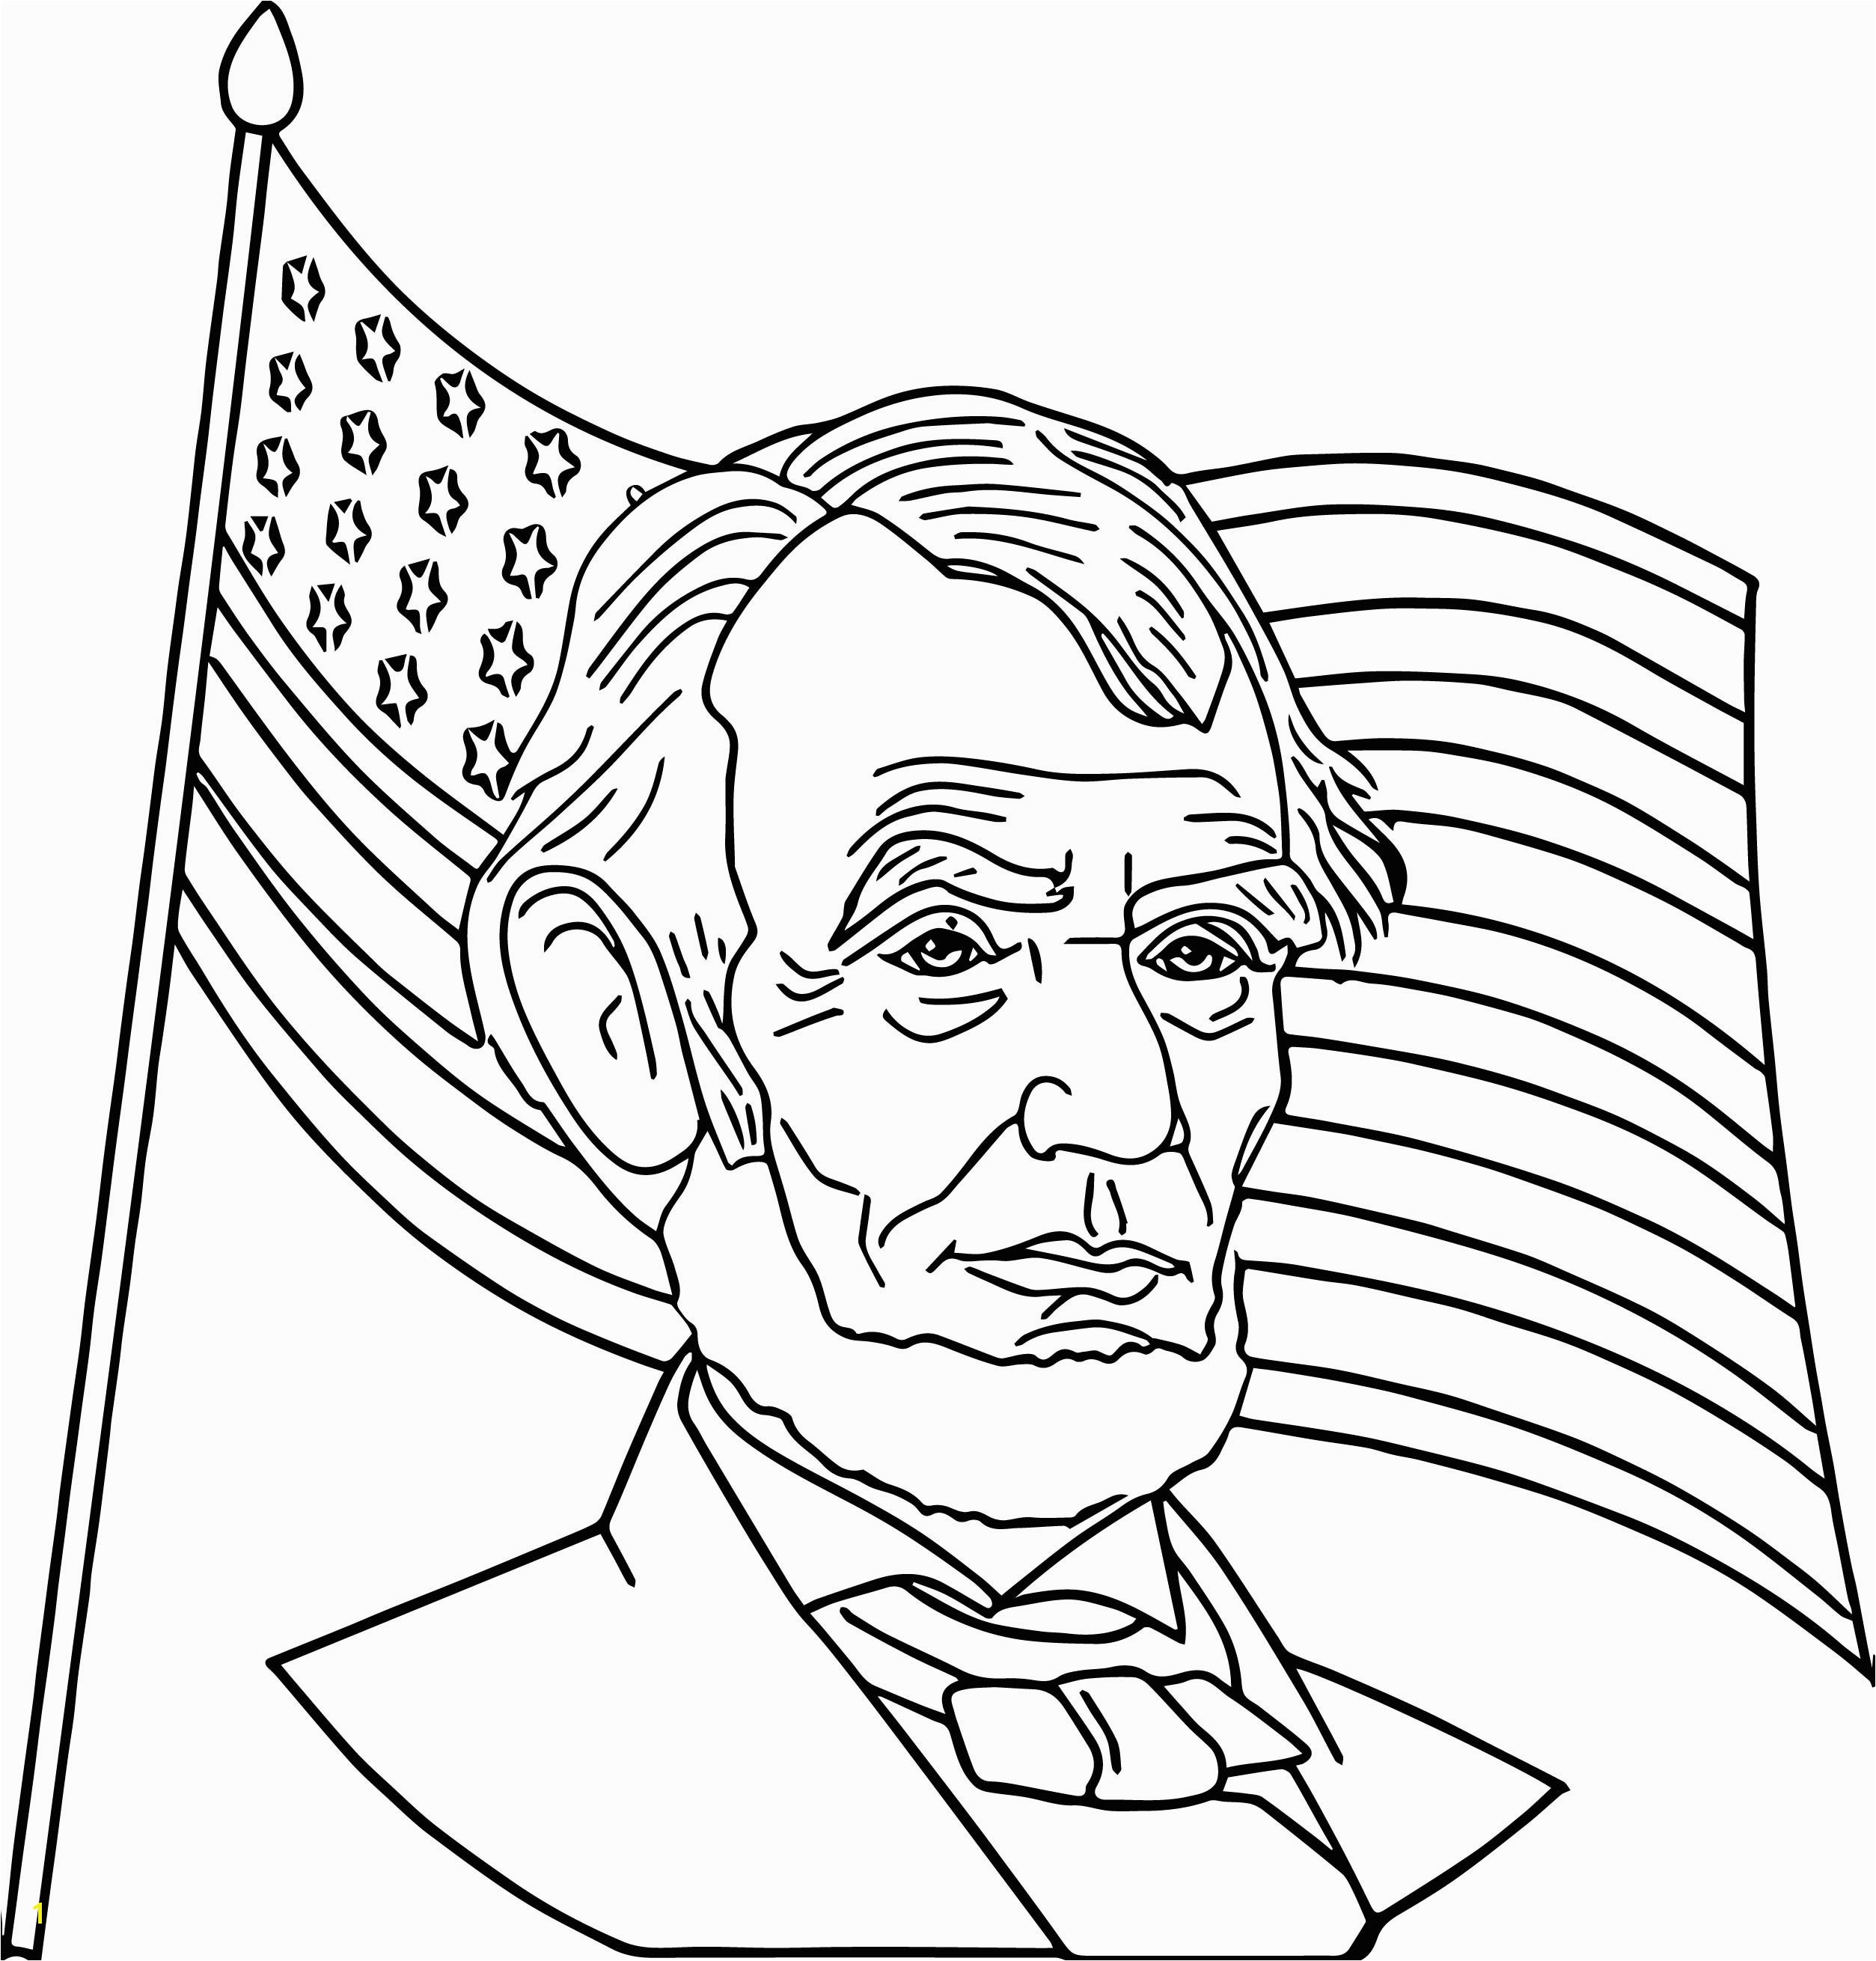 abe lincoln coloring sheet abraham lincoln coloring page mustespresso